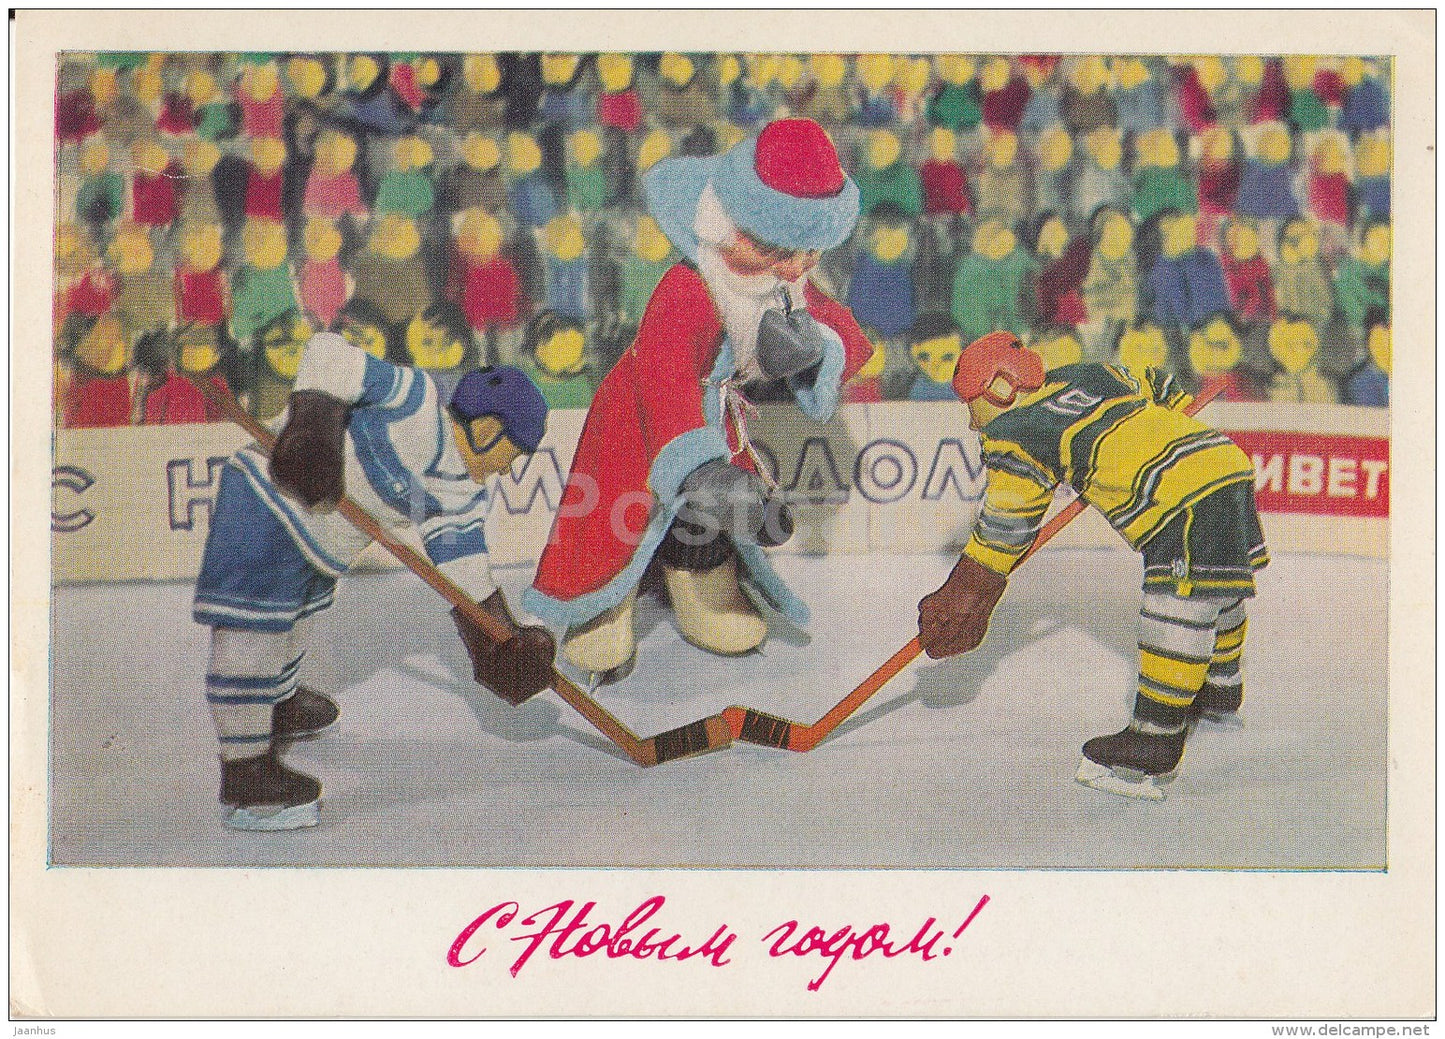 New Year Greeting Card by V. Voronin - Ice Hockey - Ded Moroz - Santa Claus - 1979 - Russia USSR - used - JH Postcards